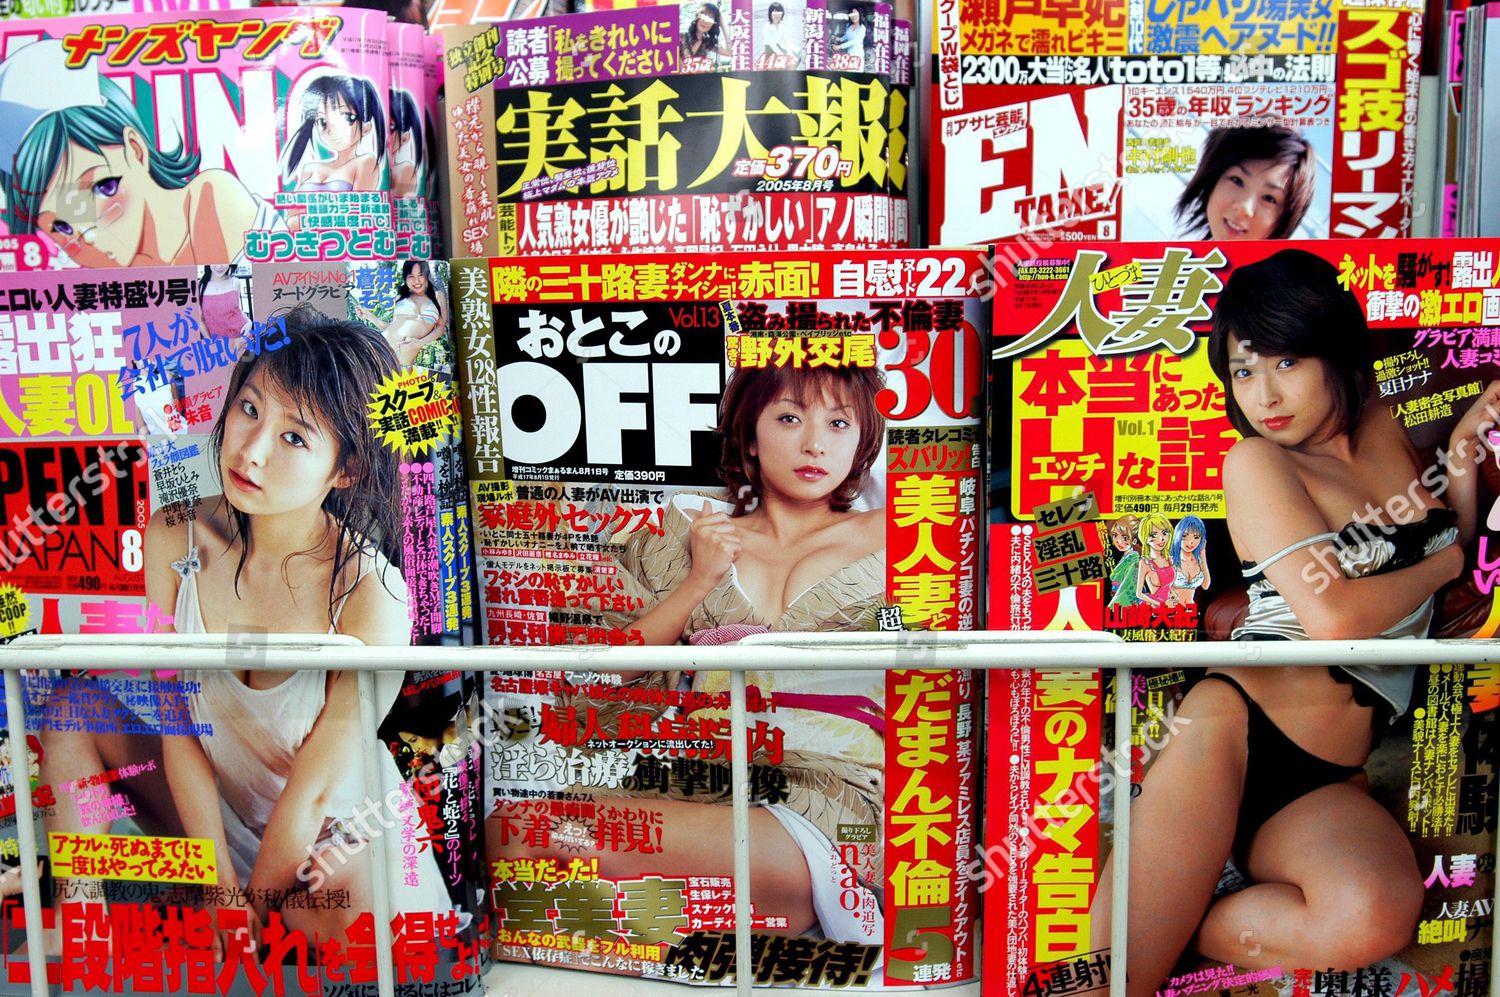 Soft Porn Japanese Magazines On Rack Downtown Editorial ...